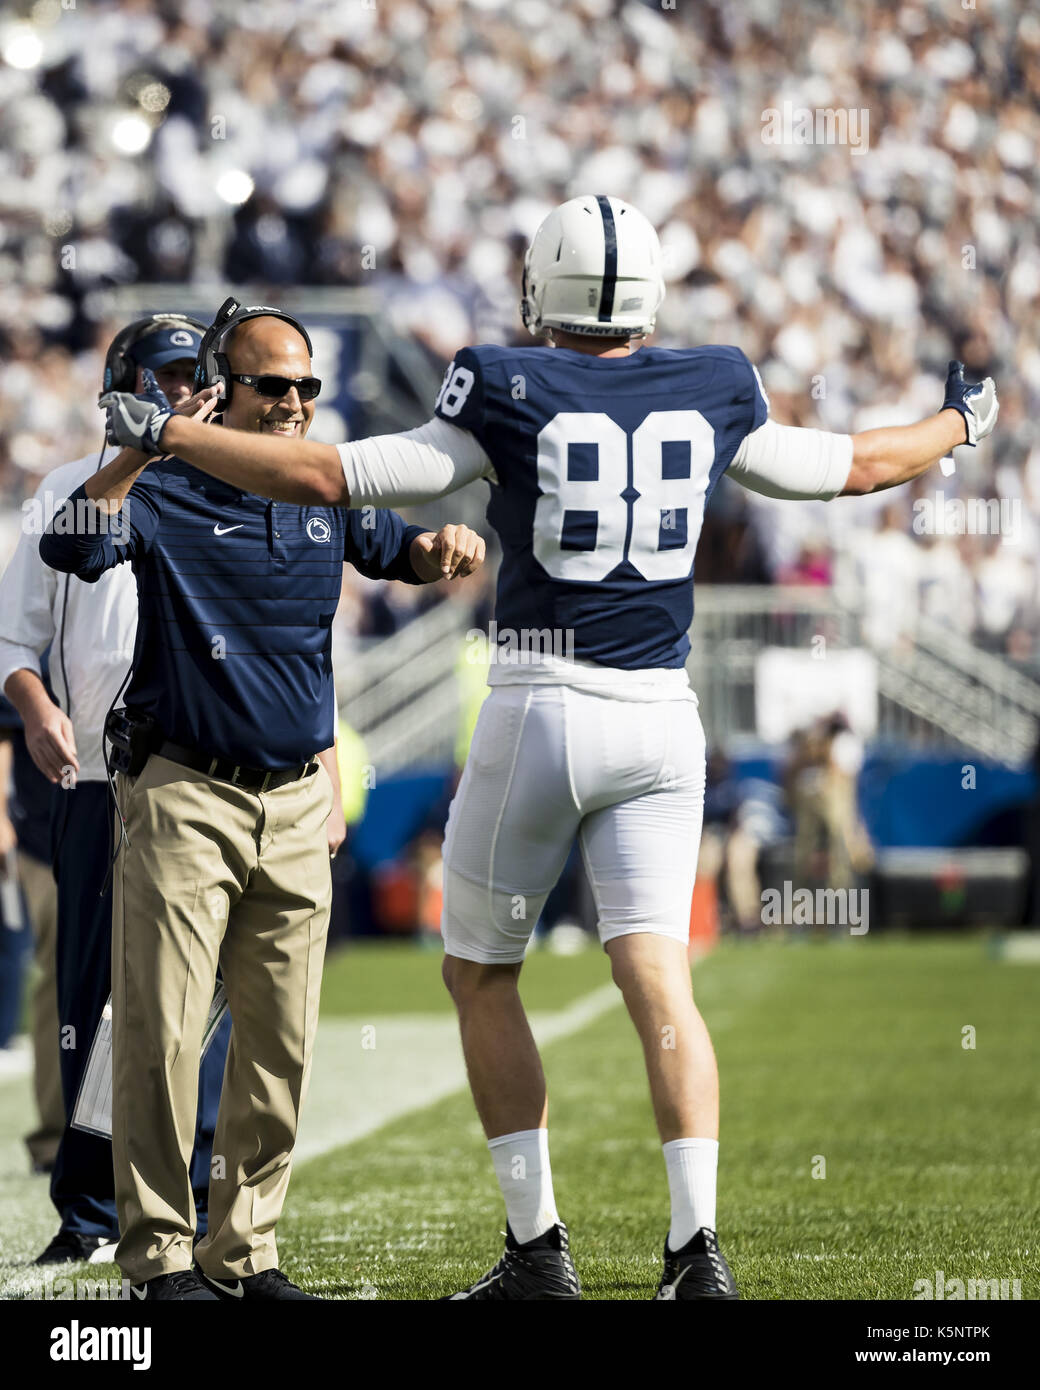 University Park, Pennsylvania, USA. 9th Sep, 2017. September 09, 2017: Penn State Nittany Lions tight end Mike Gesicki (88) celebrates a touchdown with Penn State Nittany Lions head coach James Franklin during the NCAA football game between the Pittsburgh Panthers and the Penn State Nittany Lions at Beaver Stadium in University Park, Pennsylvania. Credit: Scott Taetsch/ZUMA Wire/Alamy Live News Stock Photo